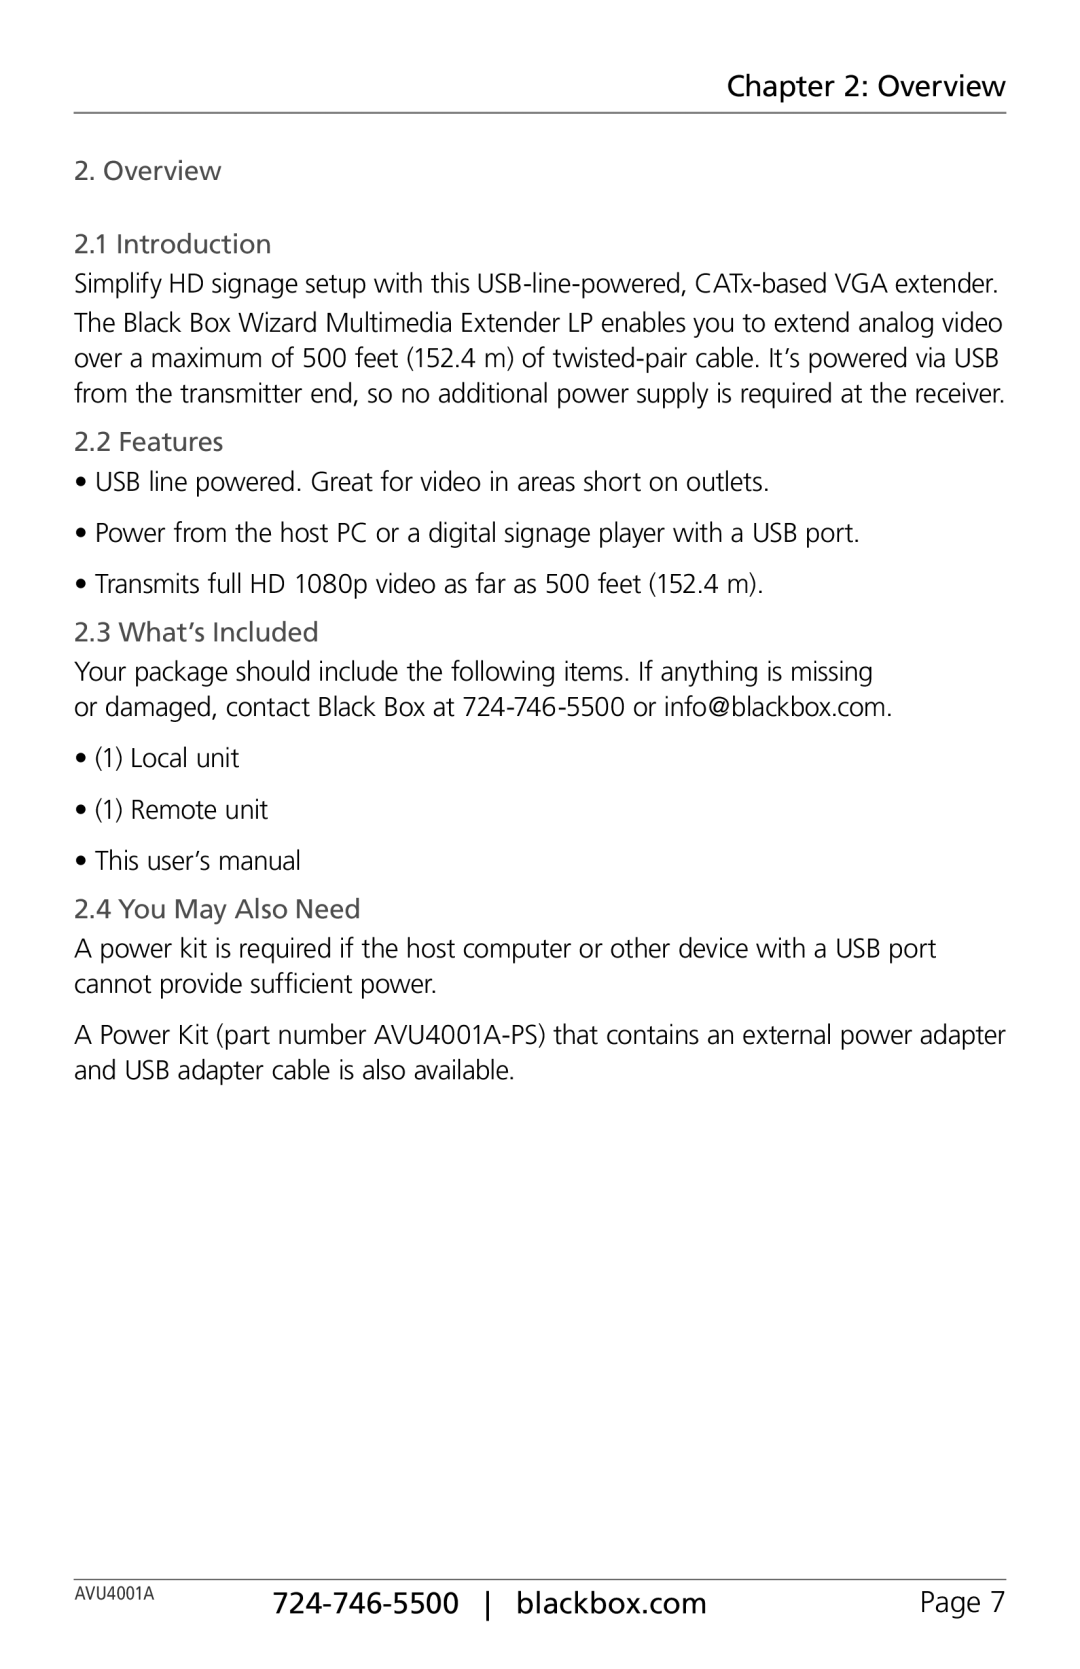 Black Box AVU4001A, AVU4001-PS manual Overview 2.1 Introduction, Features, What’s Included, You May Also Need 